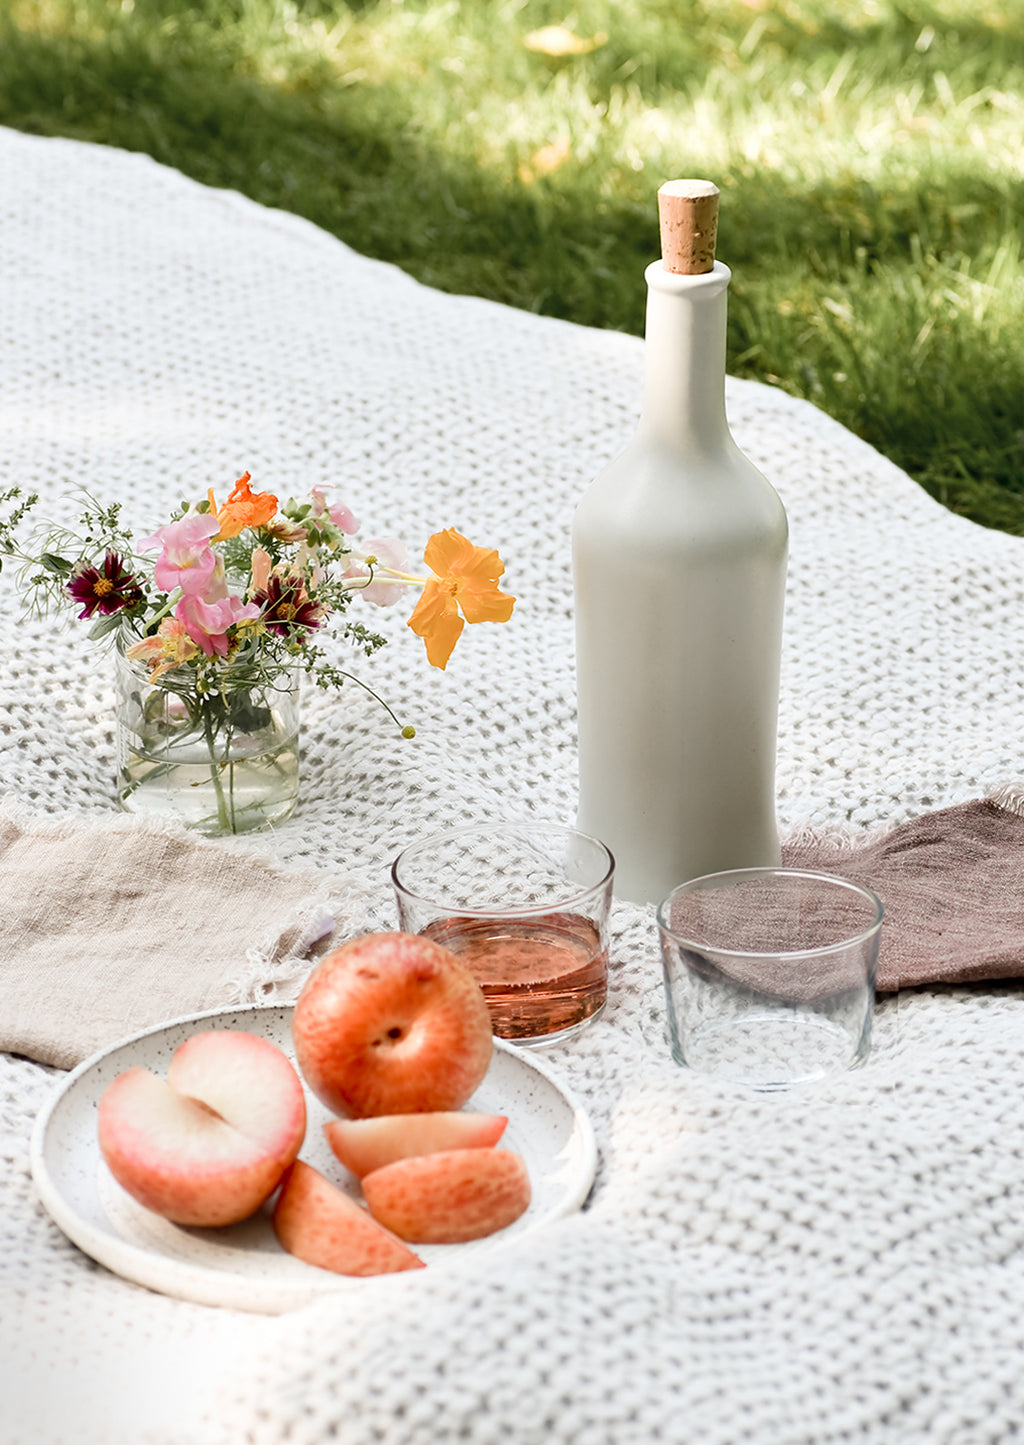 Tall / Satin White: An outdoor picnic setting with wine and pluots.